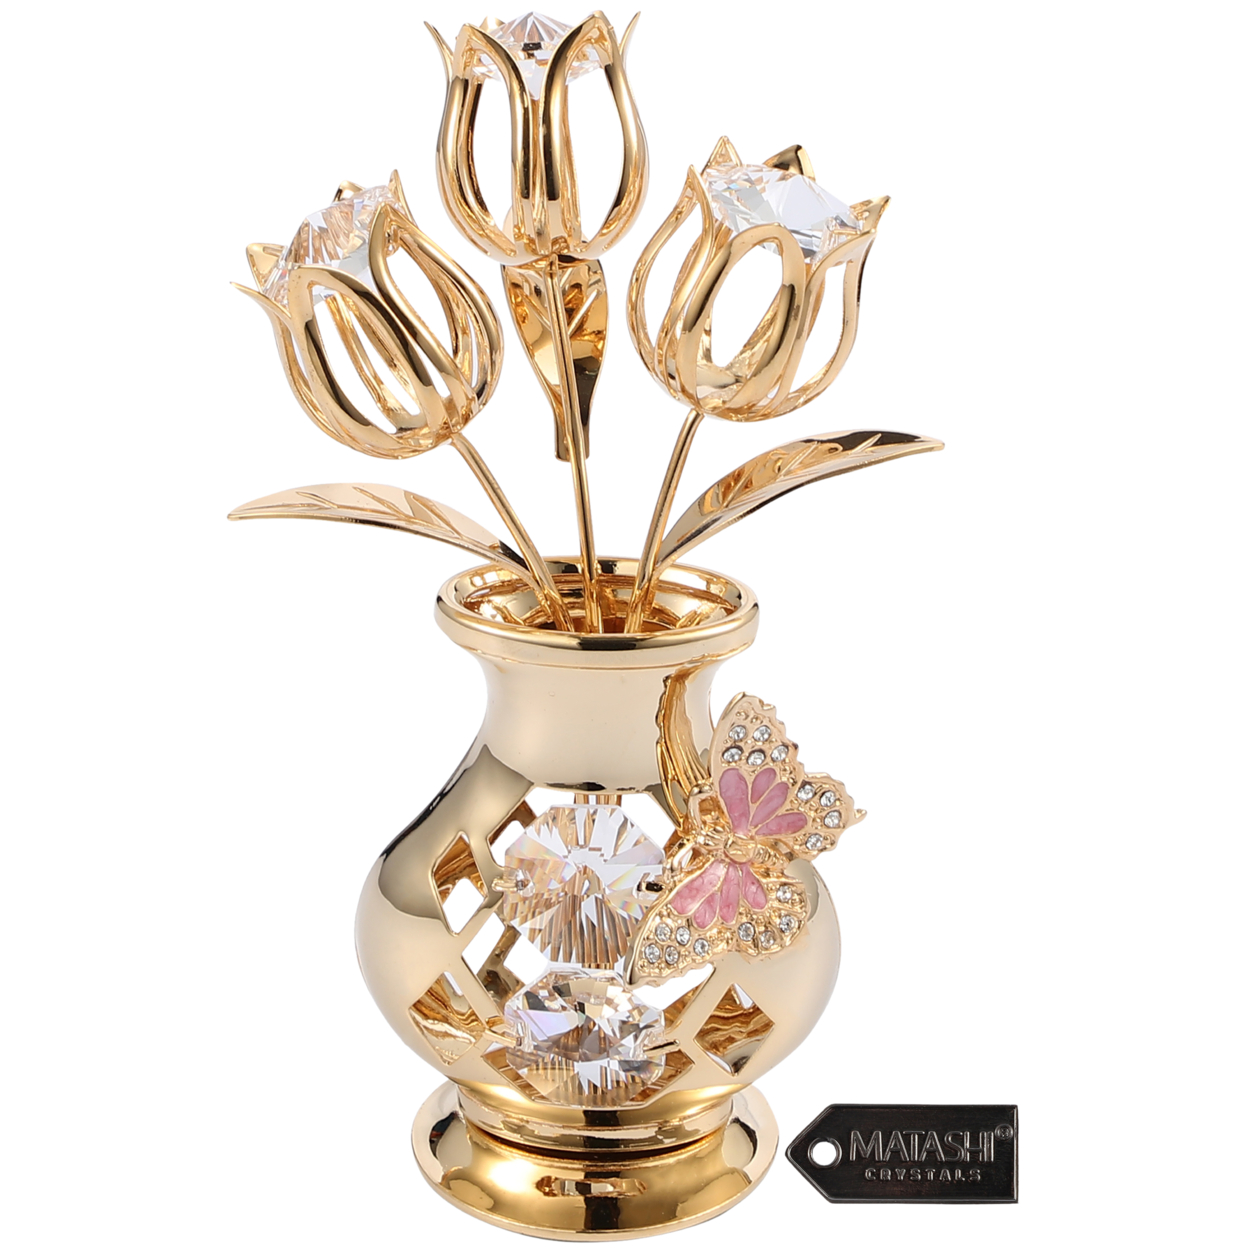 Matashi 24K Gold Plated Crystal Studded Flower Ornament In A Vase With Decorative Butterfly (Clear Crystals) Gift For Christmas Mother's Day